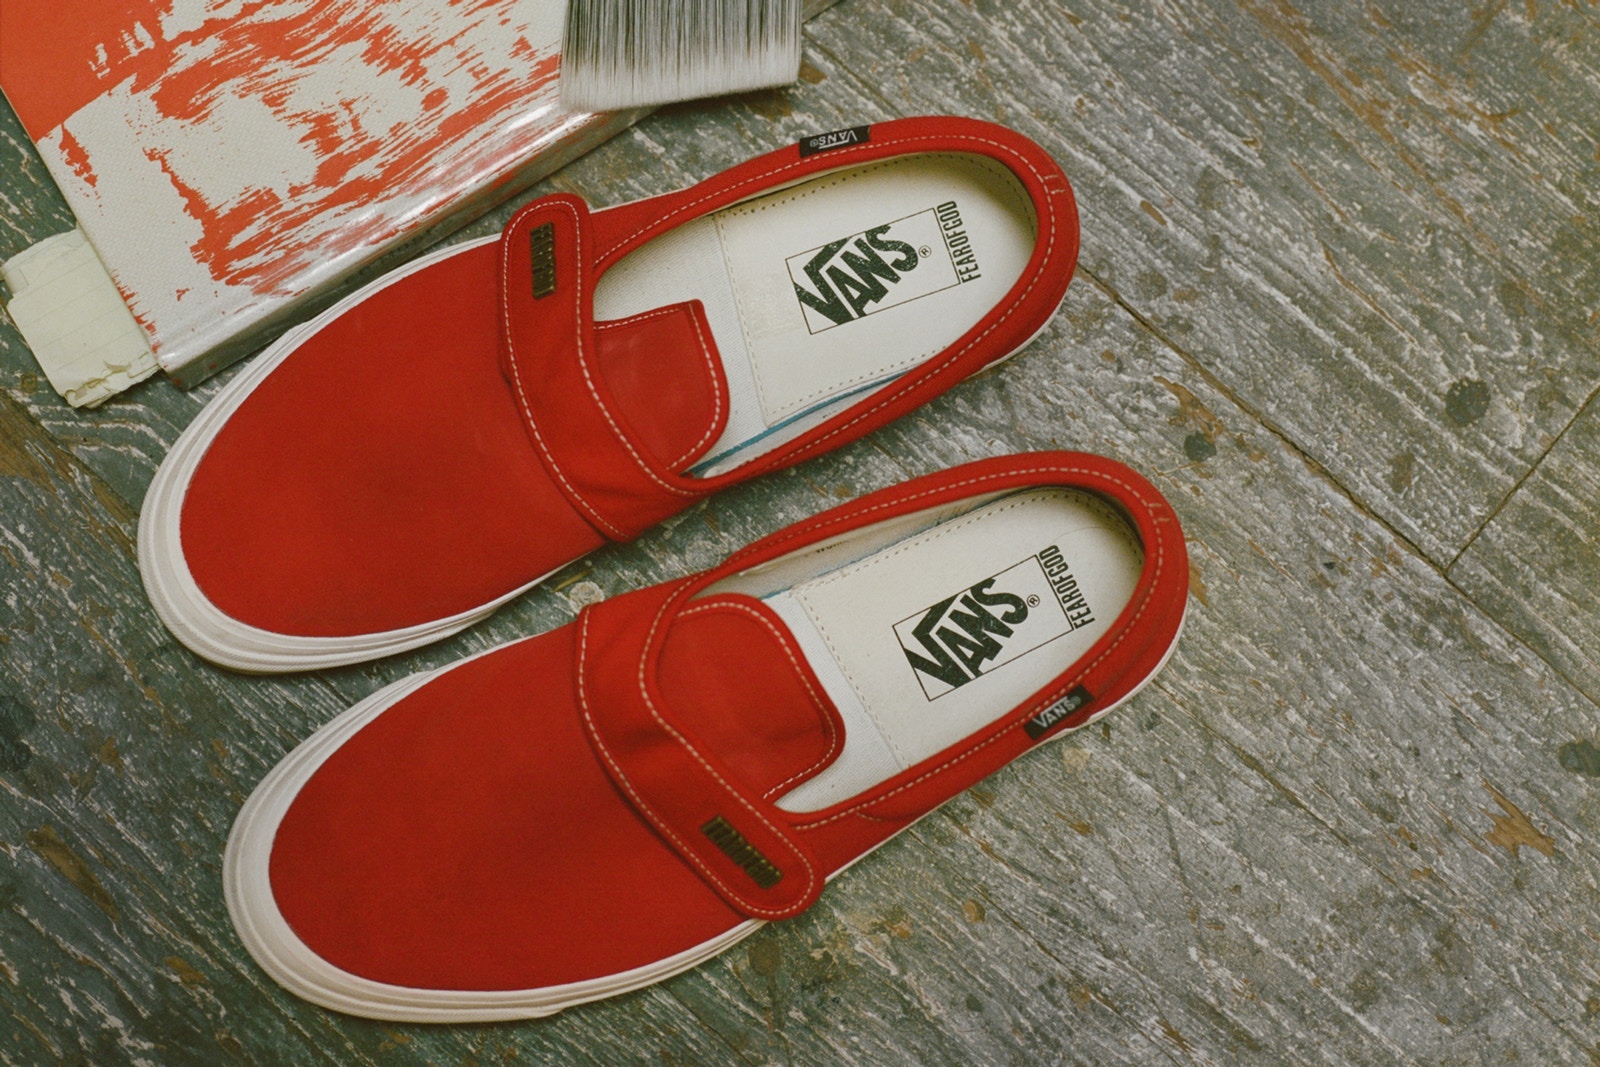 Exclusive Vans Fear of God FOG f.o.g. Collection Jerry Lorenzo Footwear sneakers shoes red white black corduroy, canvas or suede Slip-On 47 V DX Mountain Edition 35 DX and Era 95 DX pacsun pac sun